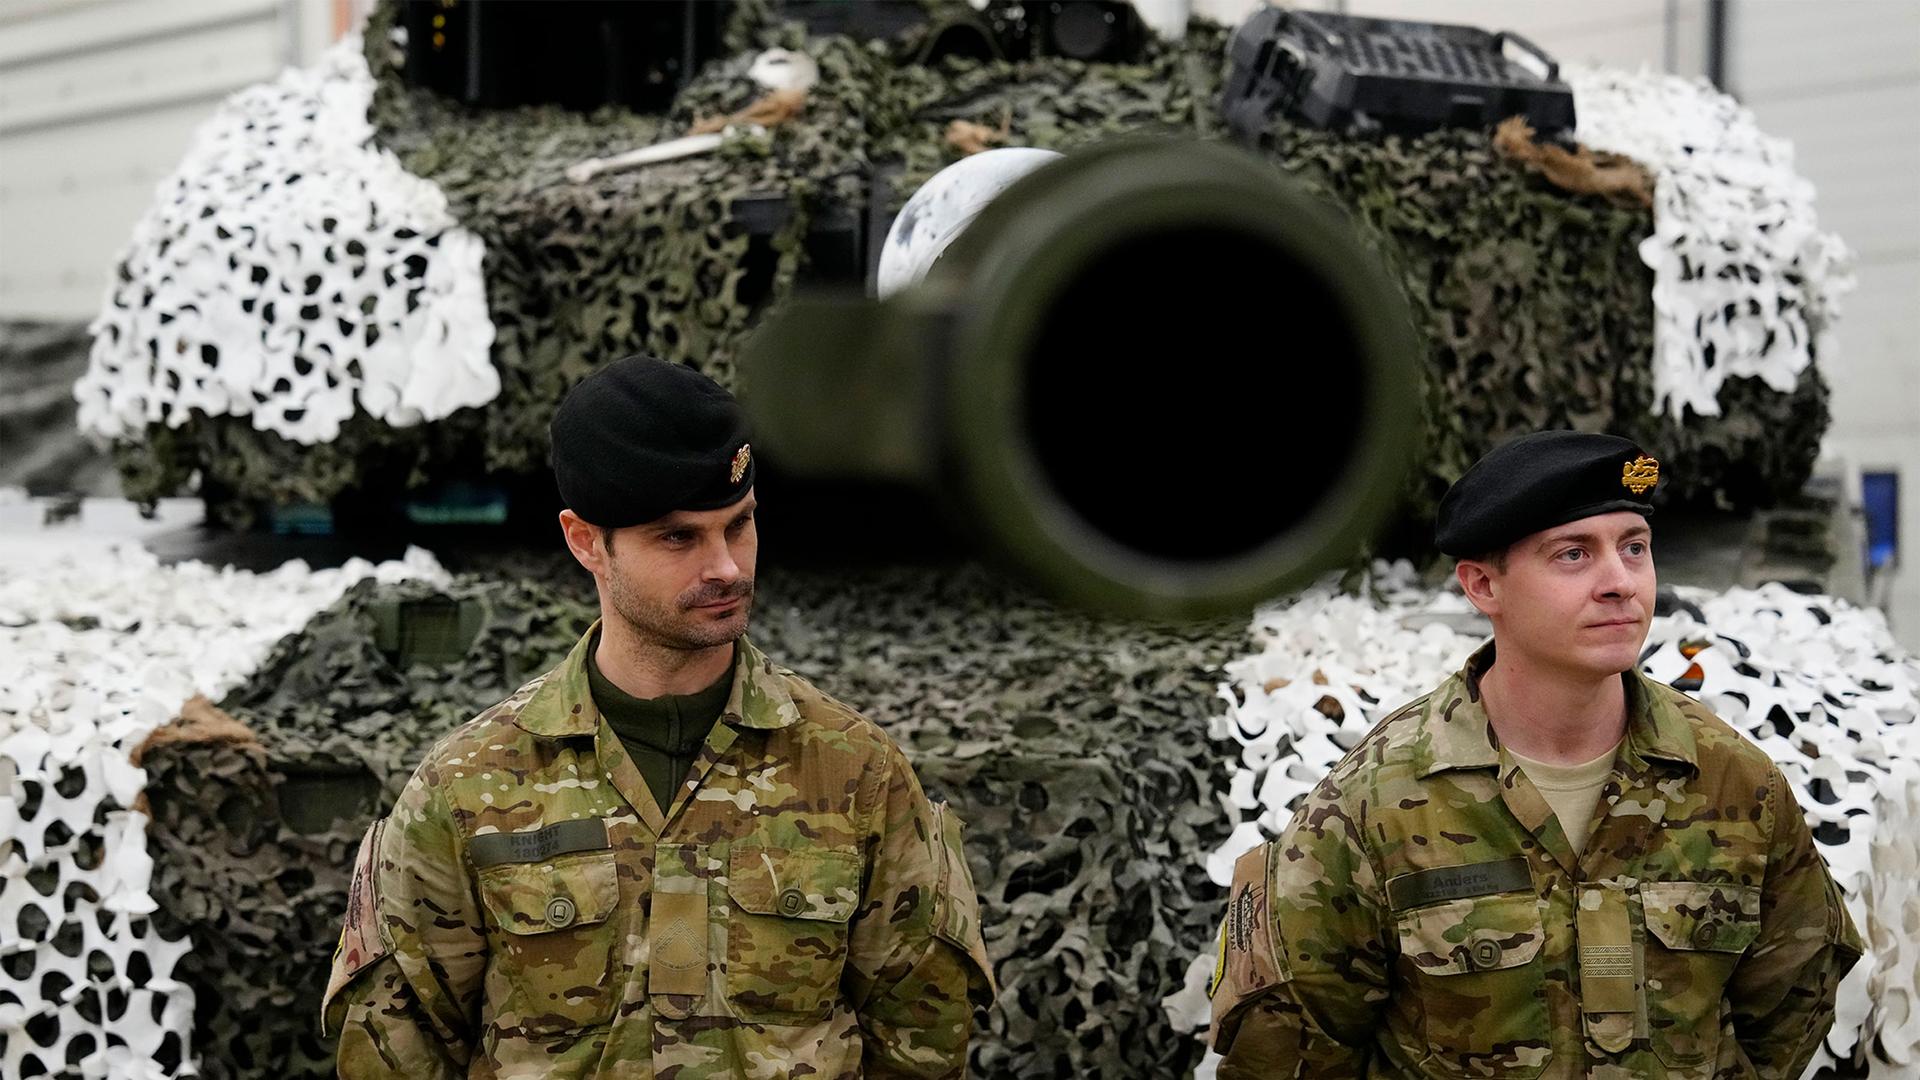 Denmark's military officers stand next to a Leopard 2A7 tank at the Tapa Military Camp, in Estonia, Jan. 19, 2023.